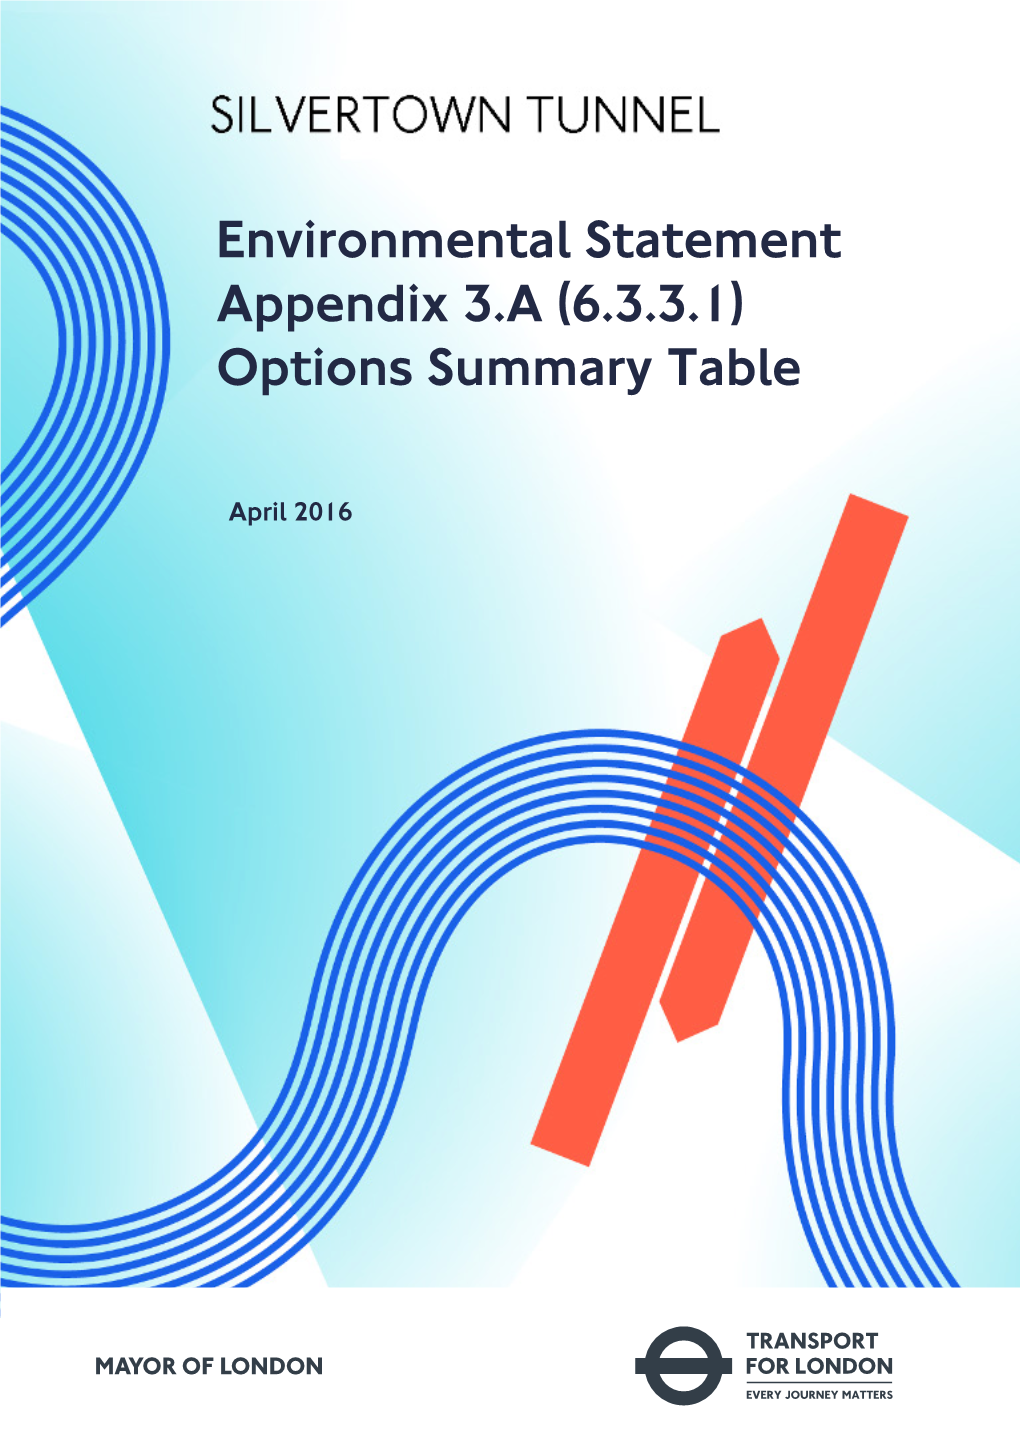 Environmental Statement Appendix 3.A (6.3.3.1) Options Summary Table